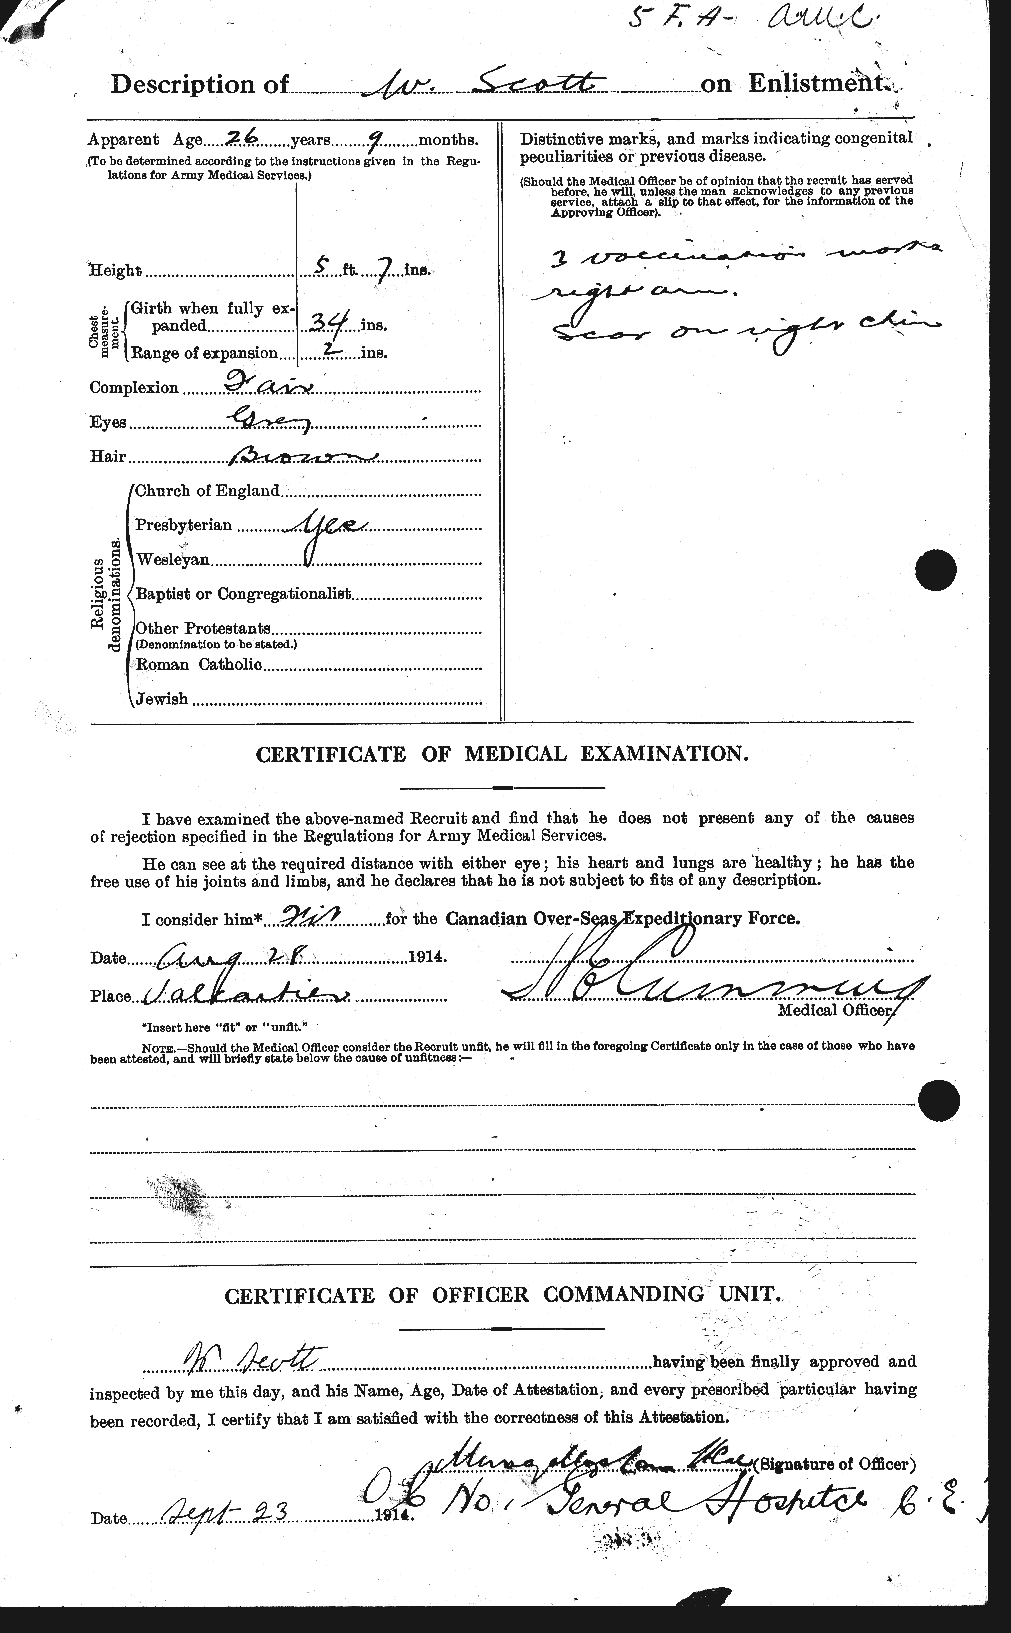 Personnel Records of the First World War - CEF 086757b